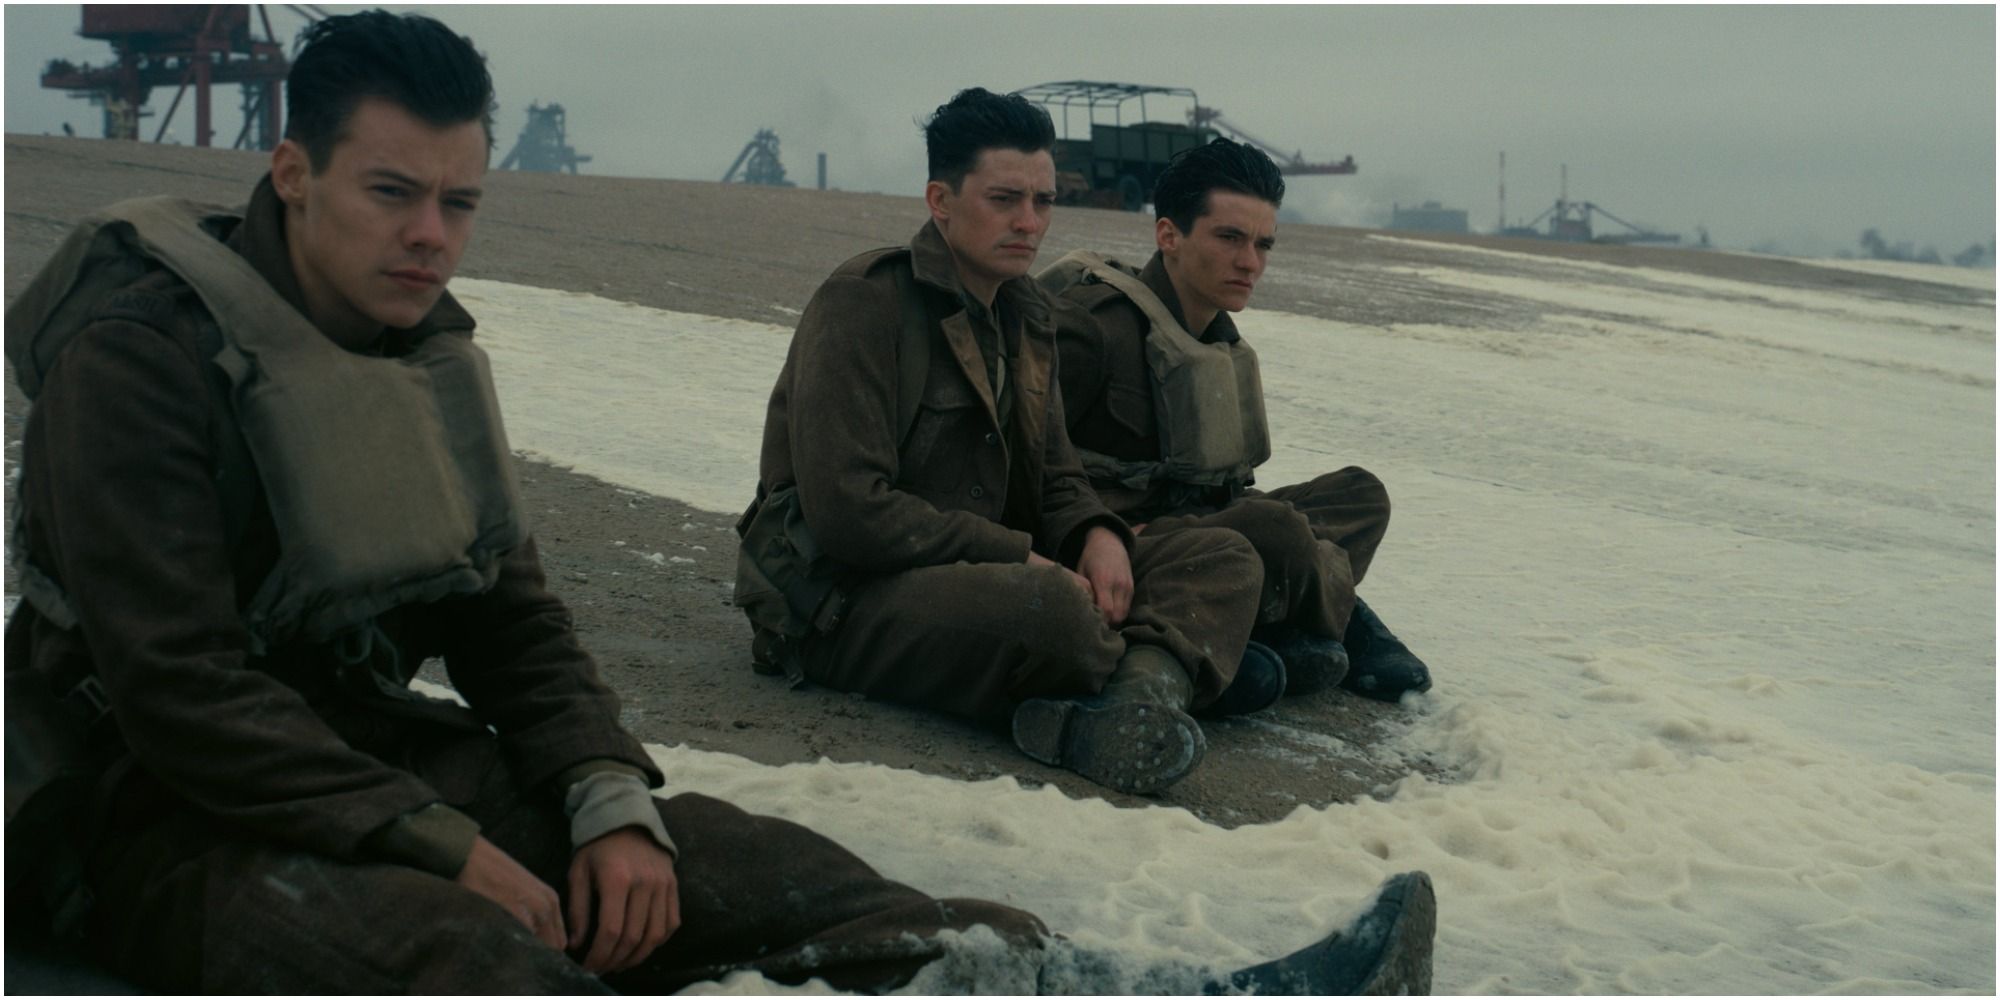 Fionn Whitehead as Tommy, Aneurin Barnard as Gibson and Harry Styles as Alex in Dunkirk 